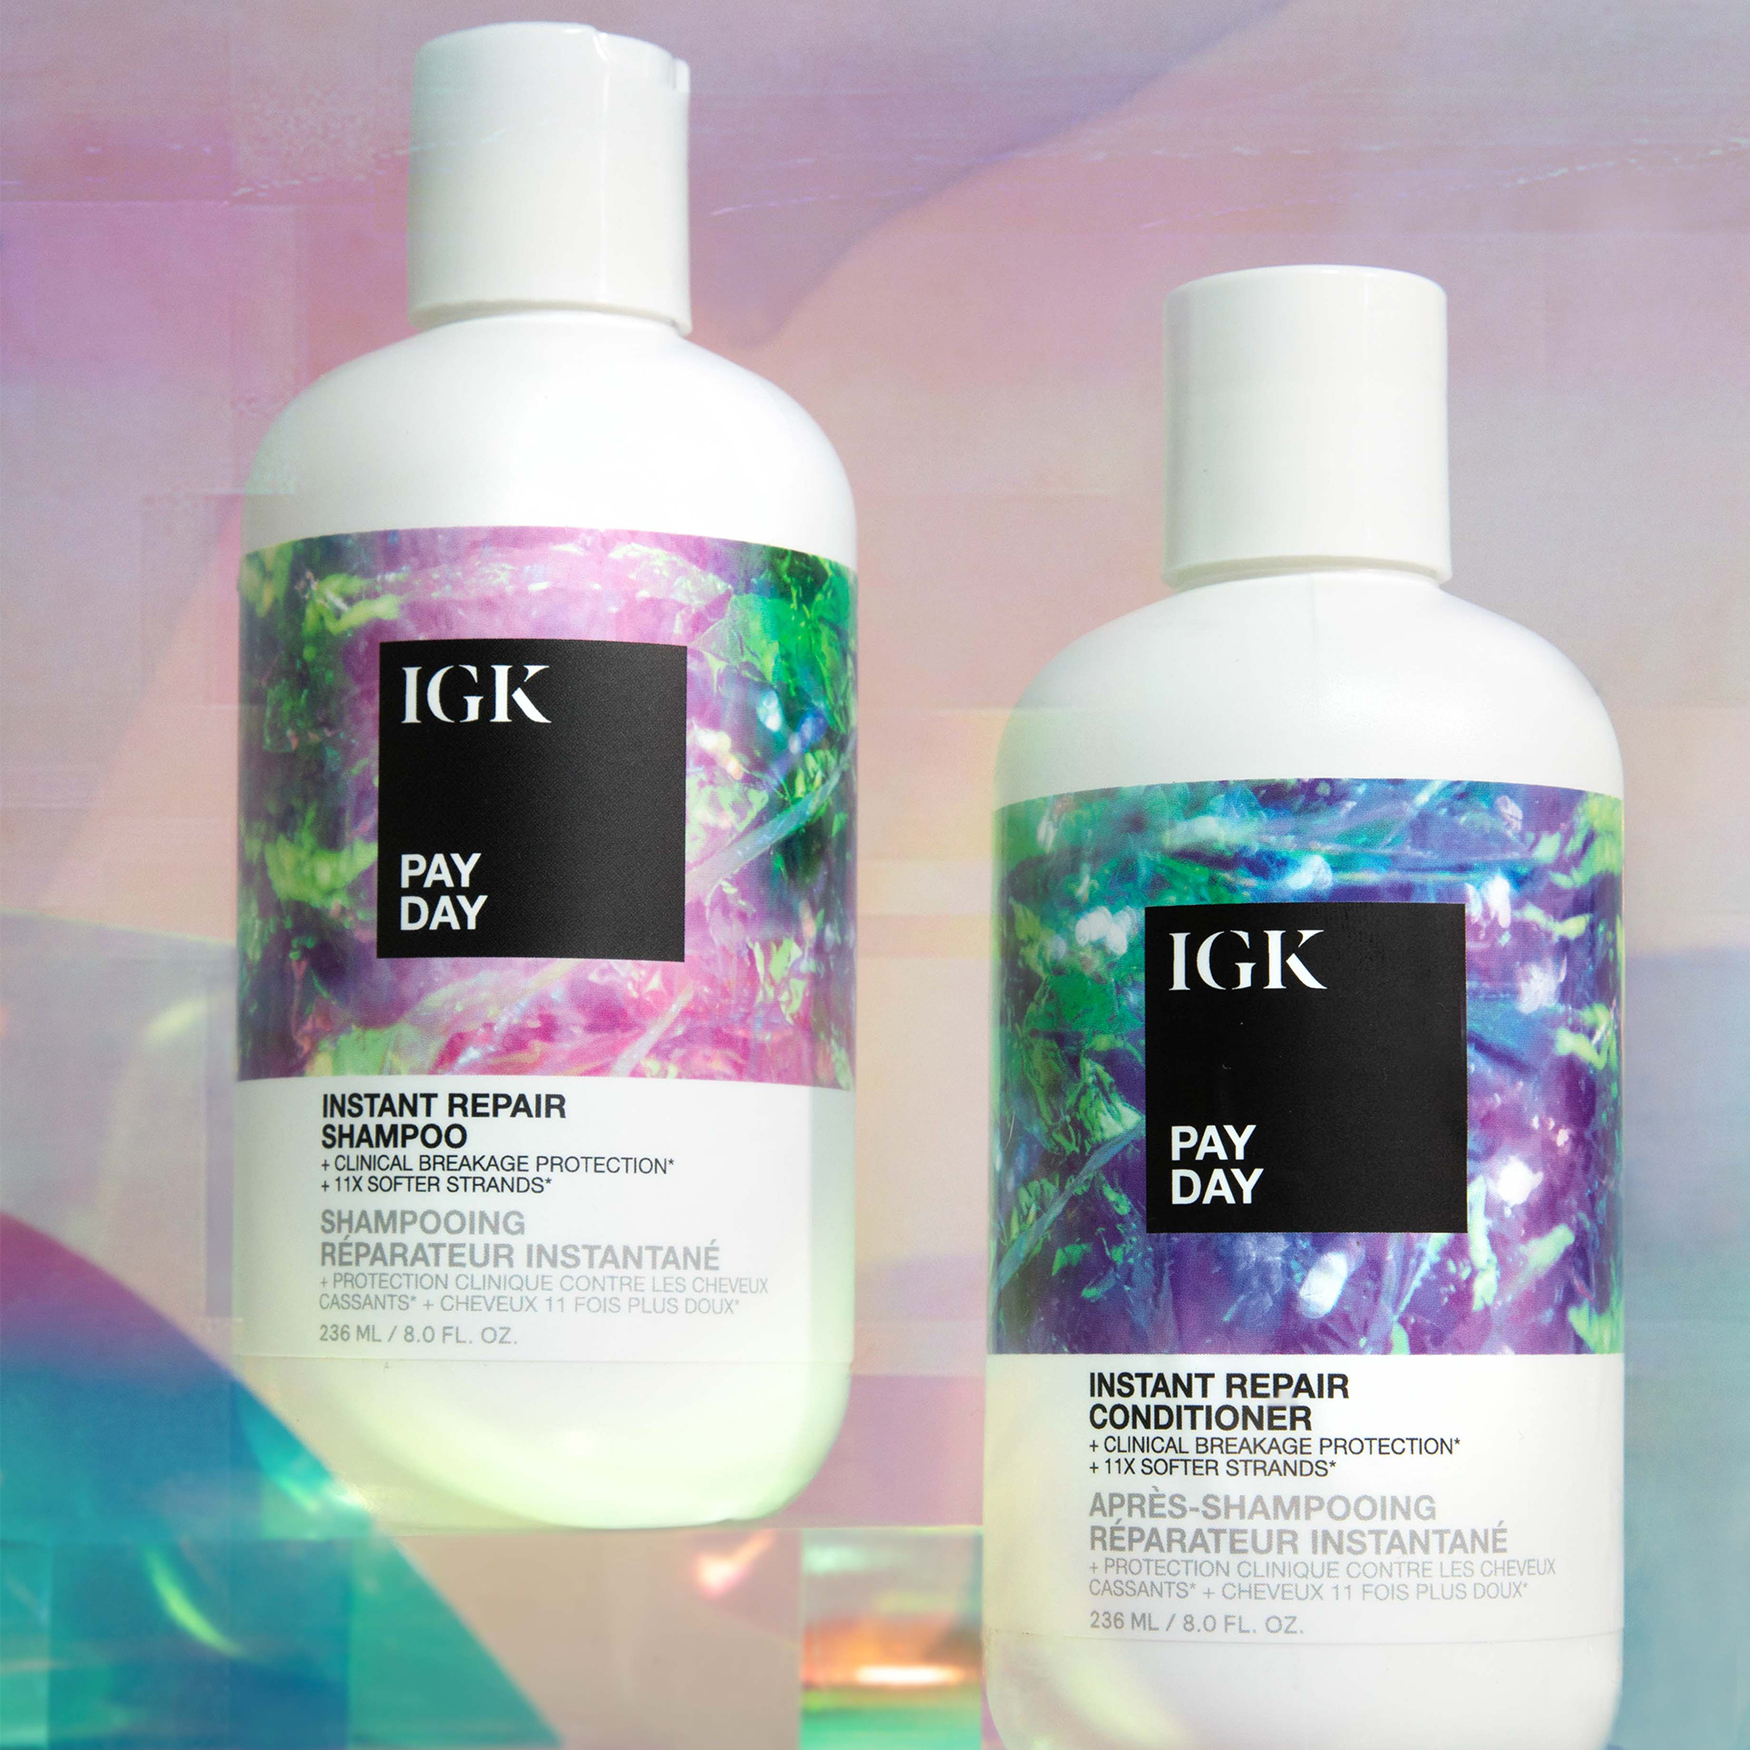 IGK Hair Pay Day Instant Repair Shampoo | Space NK